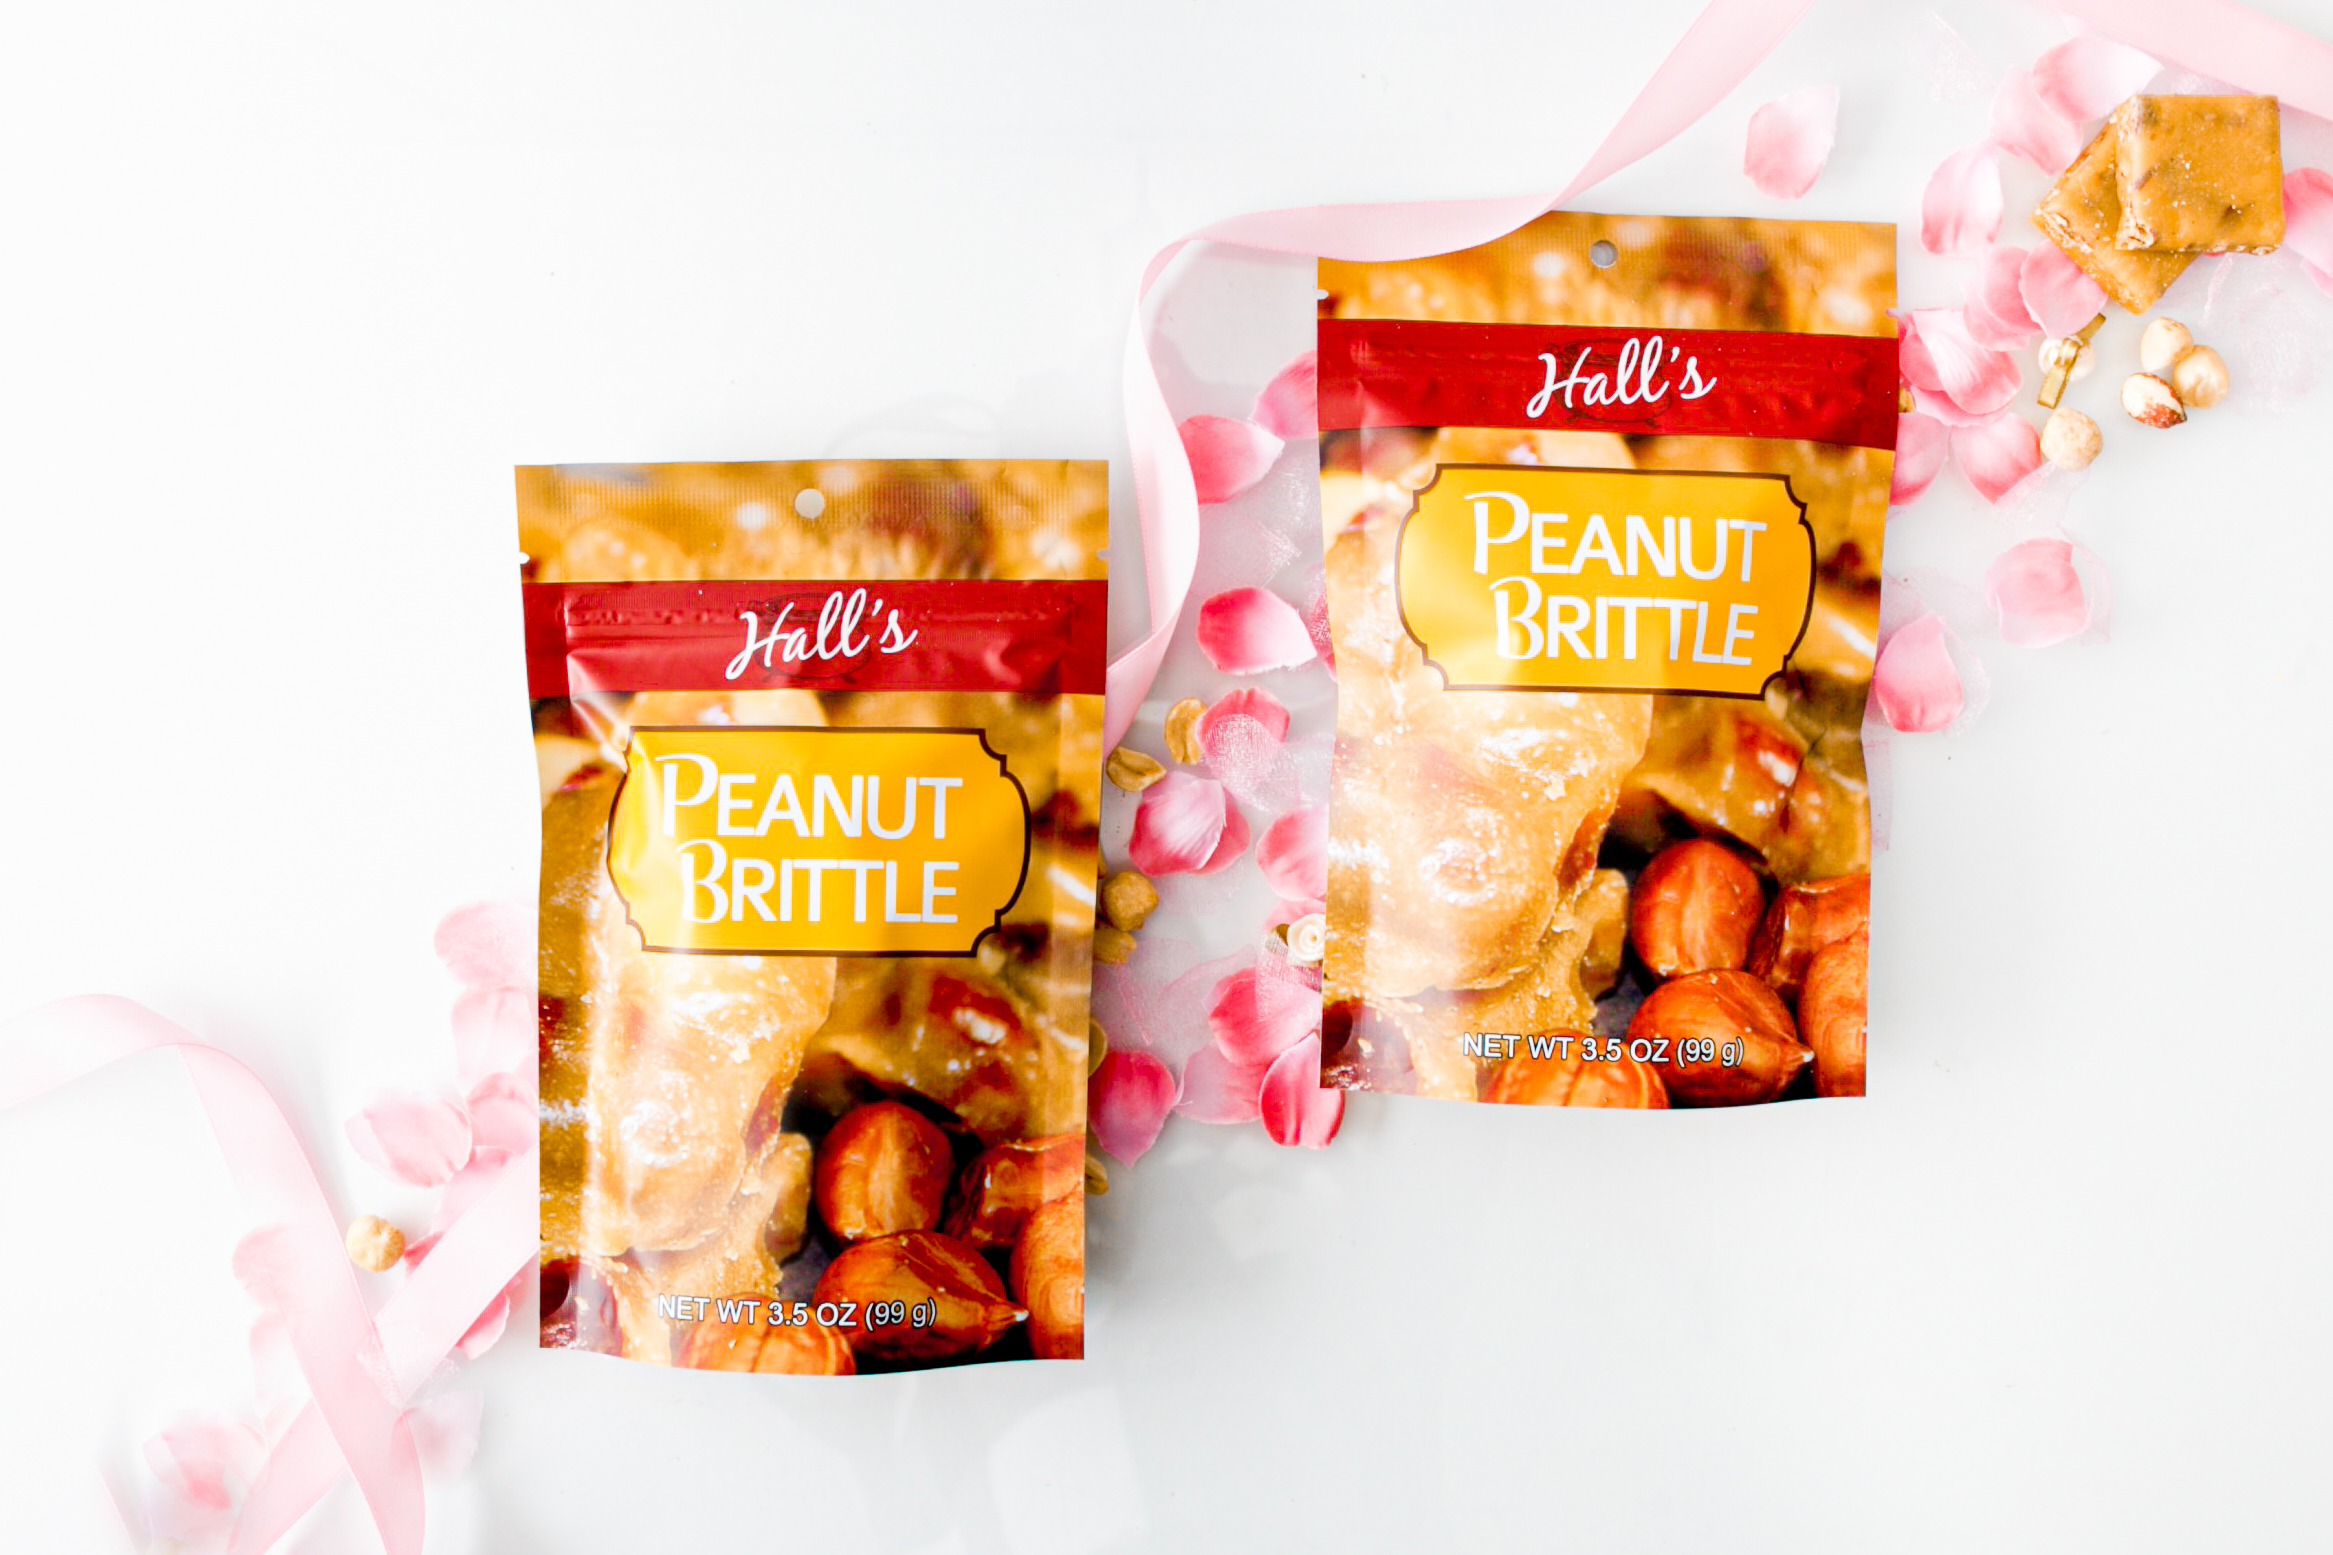 peanut brittle snack bags for valentines day gifts